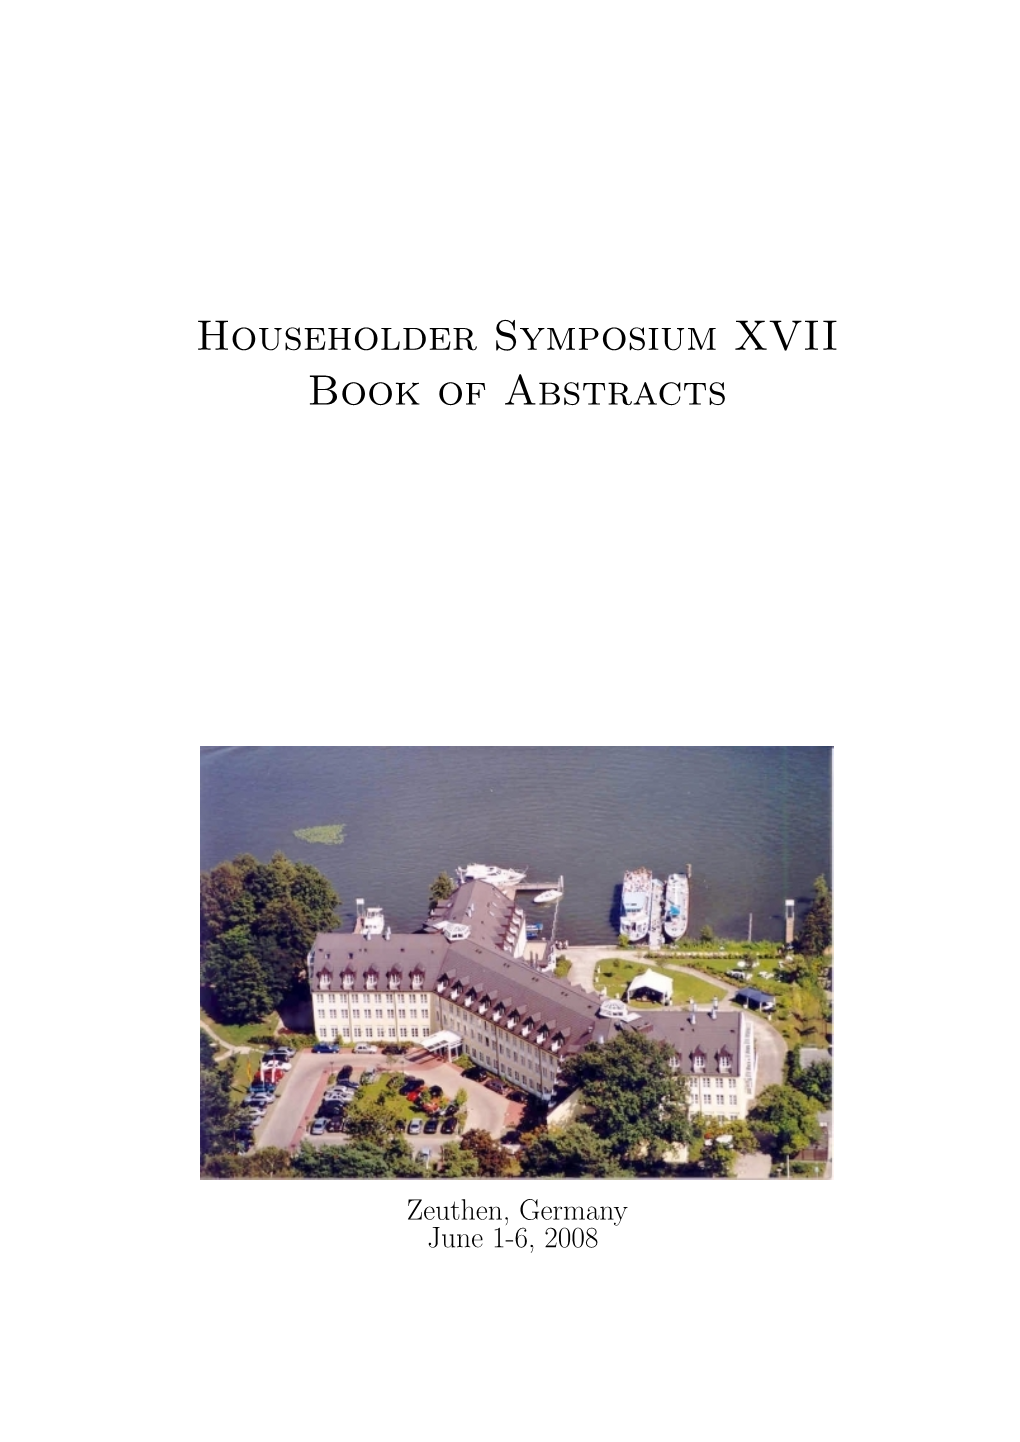 Householder Symposium XVII Book of Abstracts